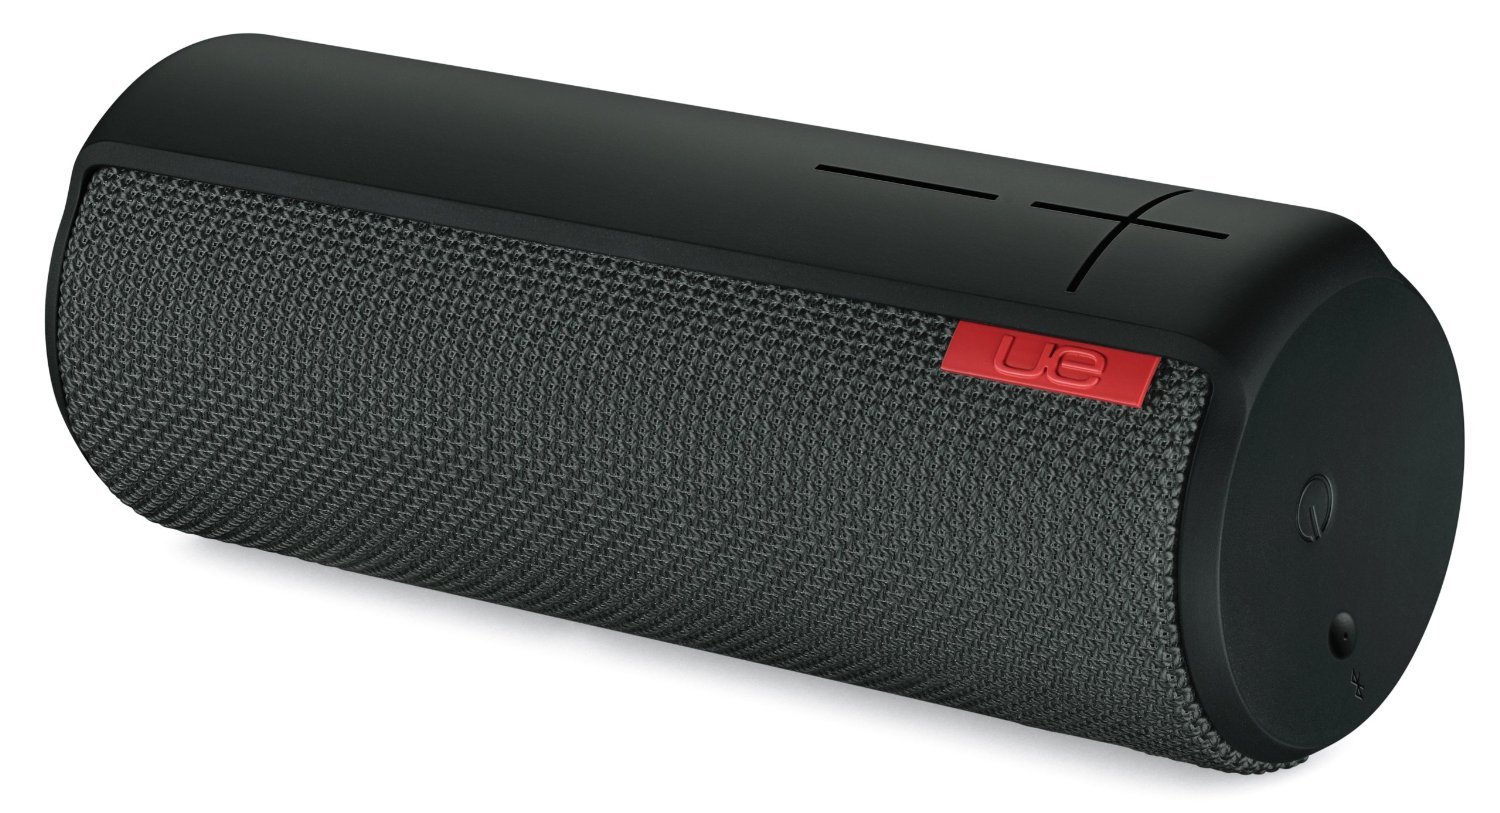 Get a refurbished UE Boom speaker from Amazon for just $57